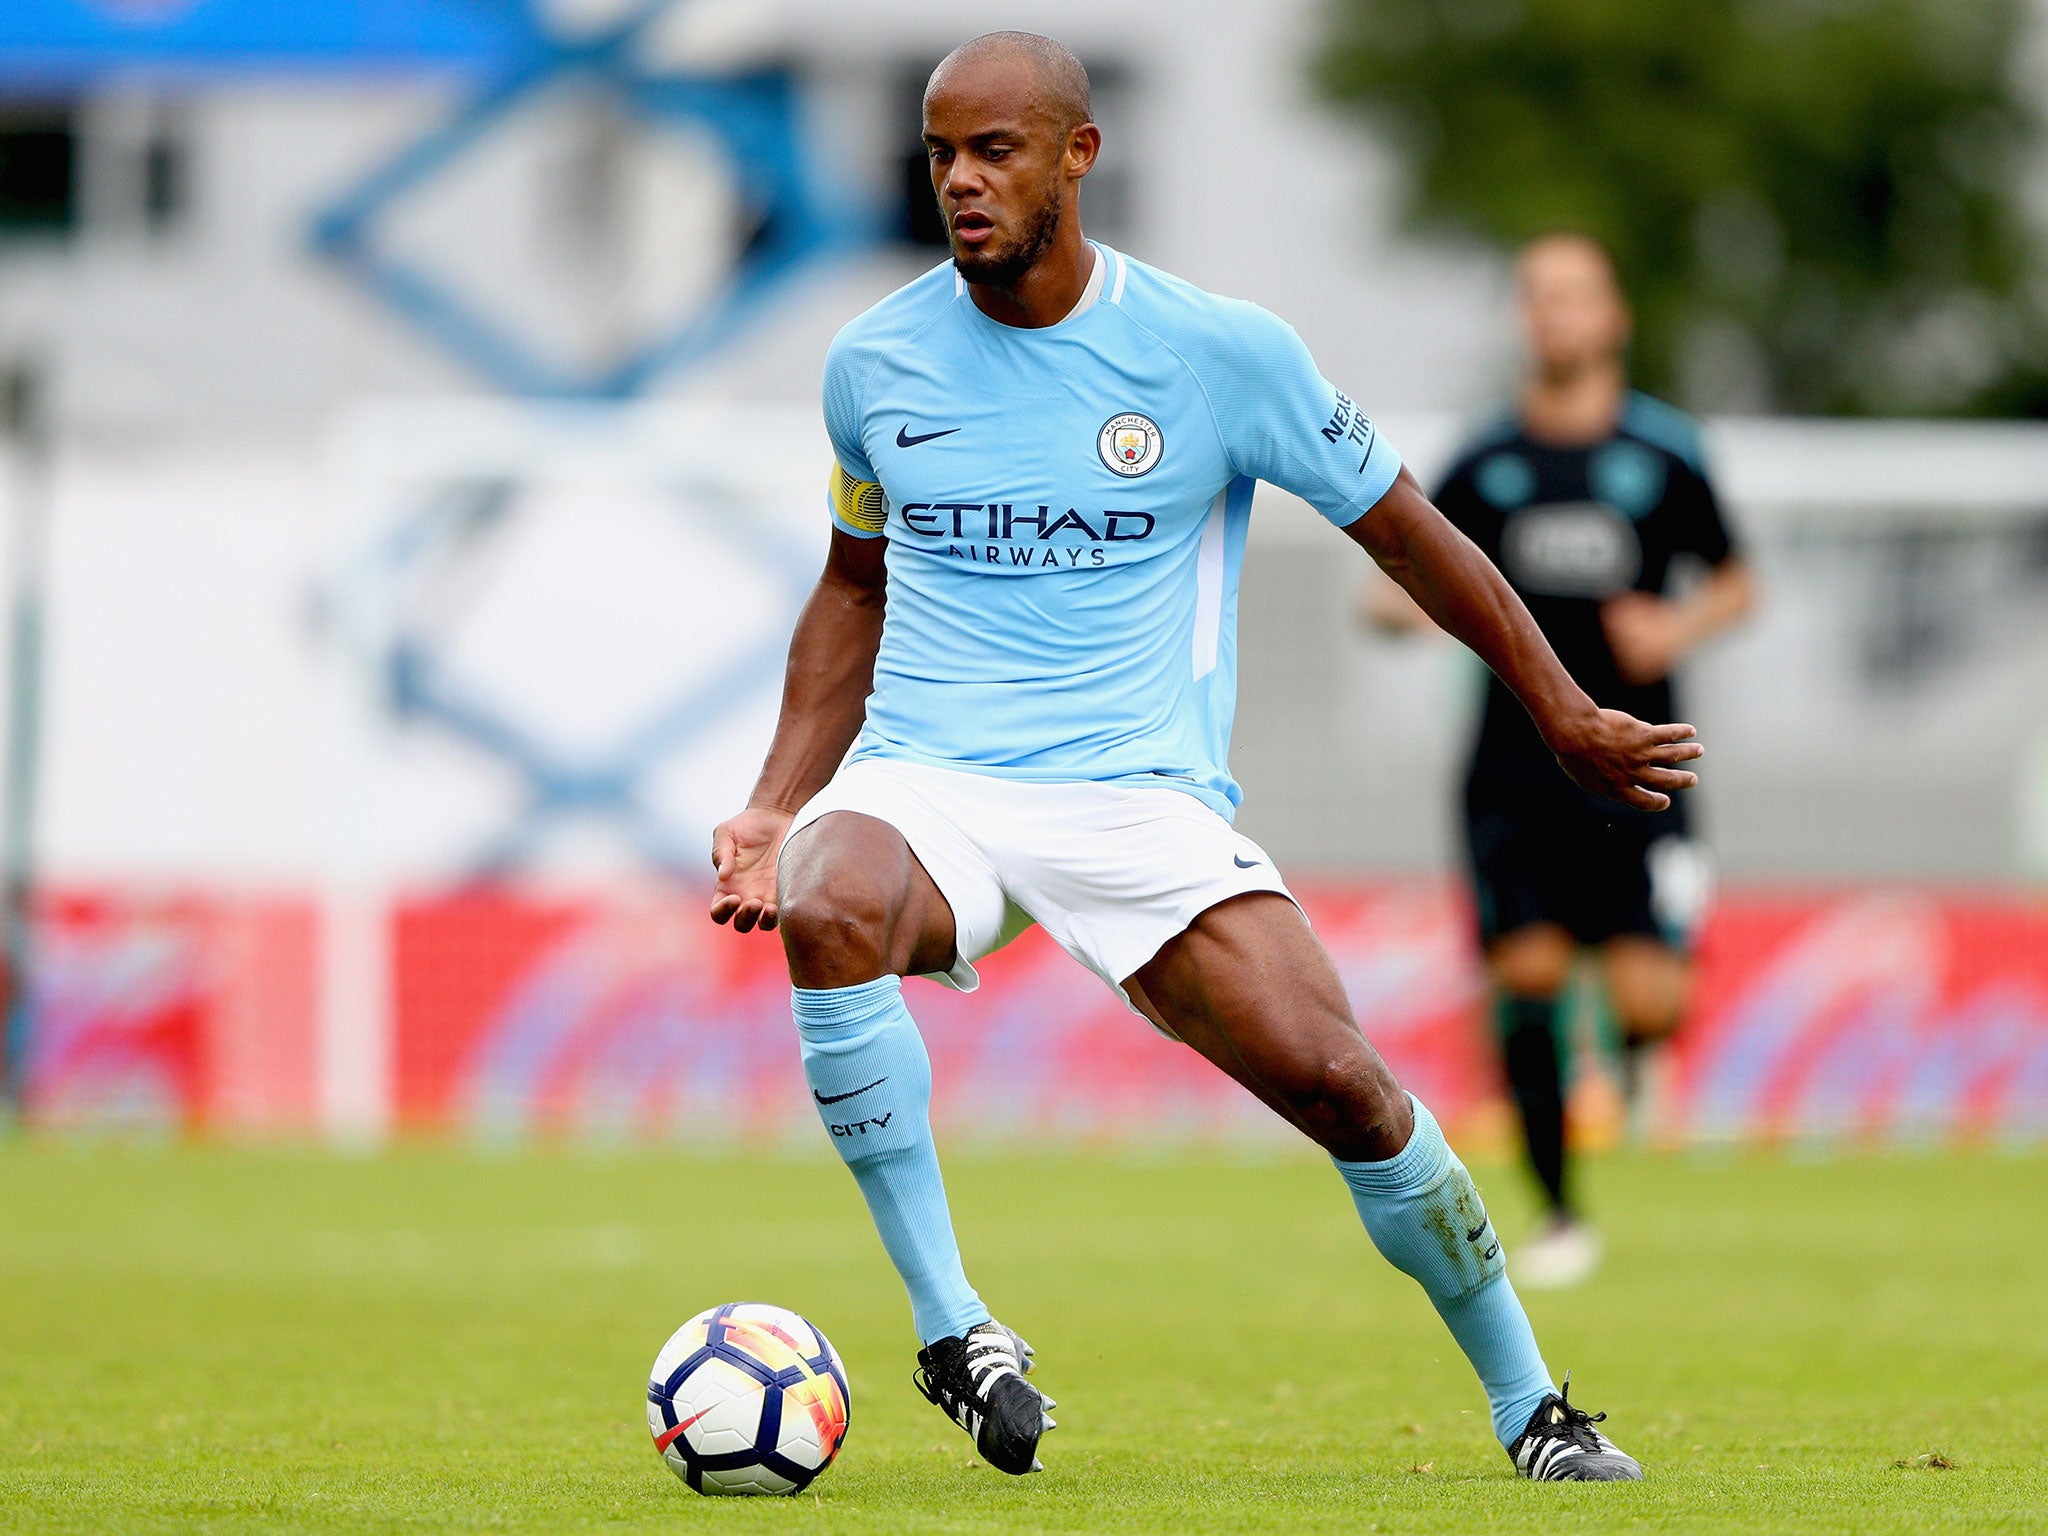 The Man City defender has a long-running history of injuries